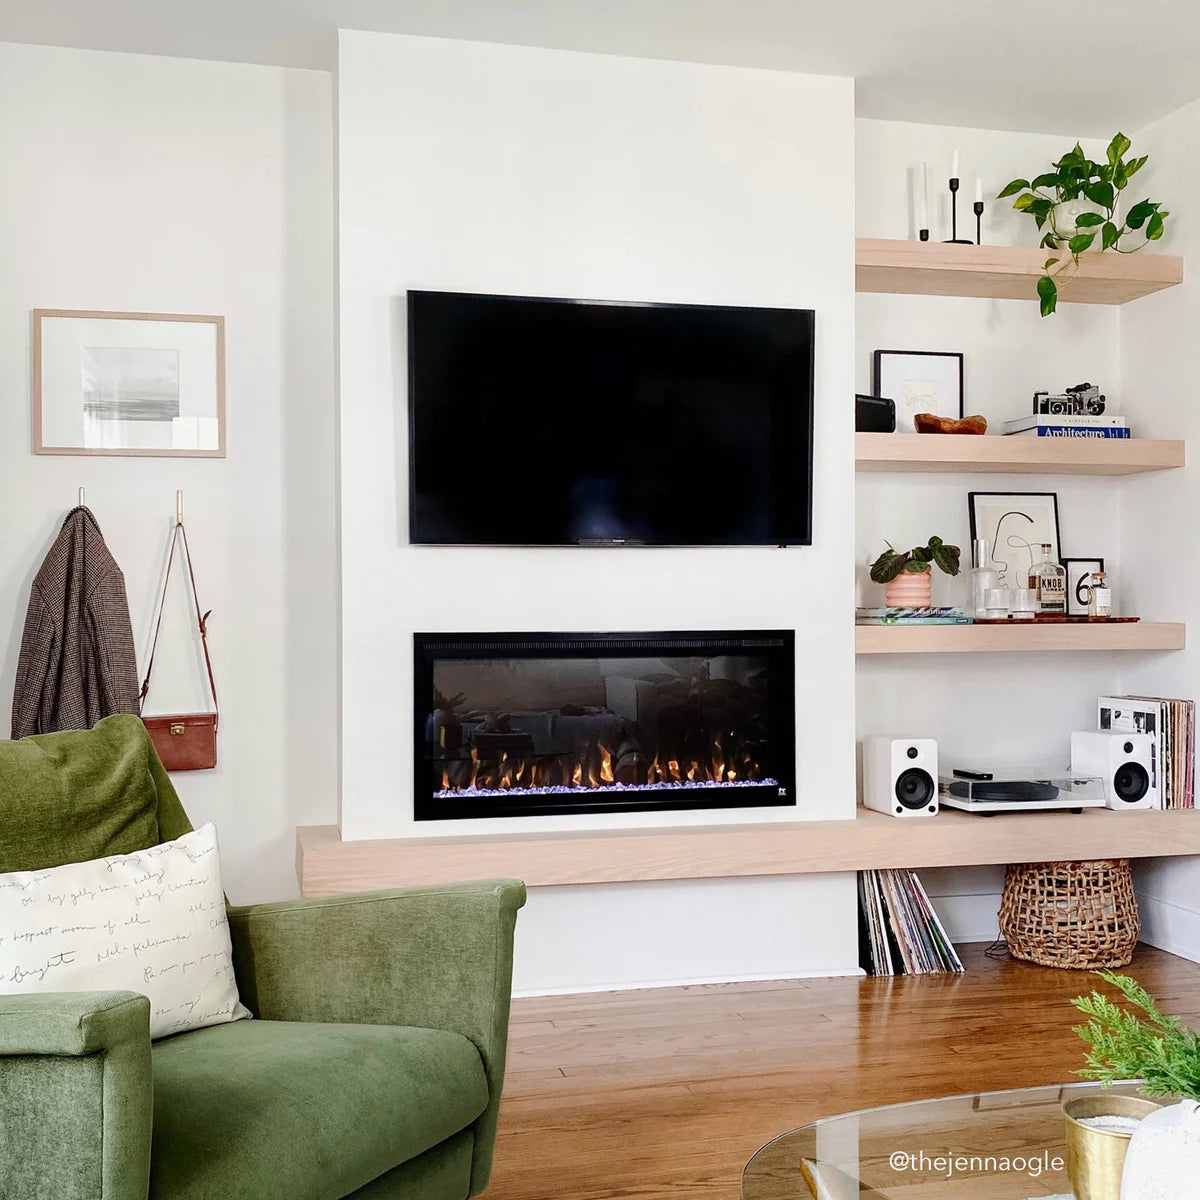 Sideline Elite 42 Inch Recessed Smart Electric Fireplace 80042